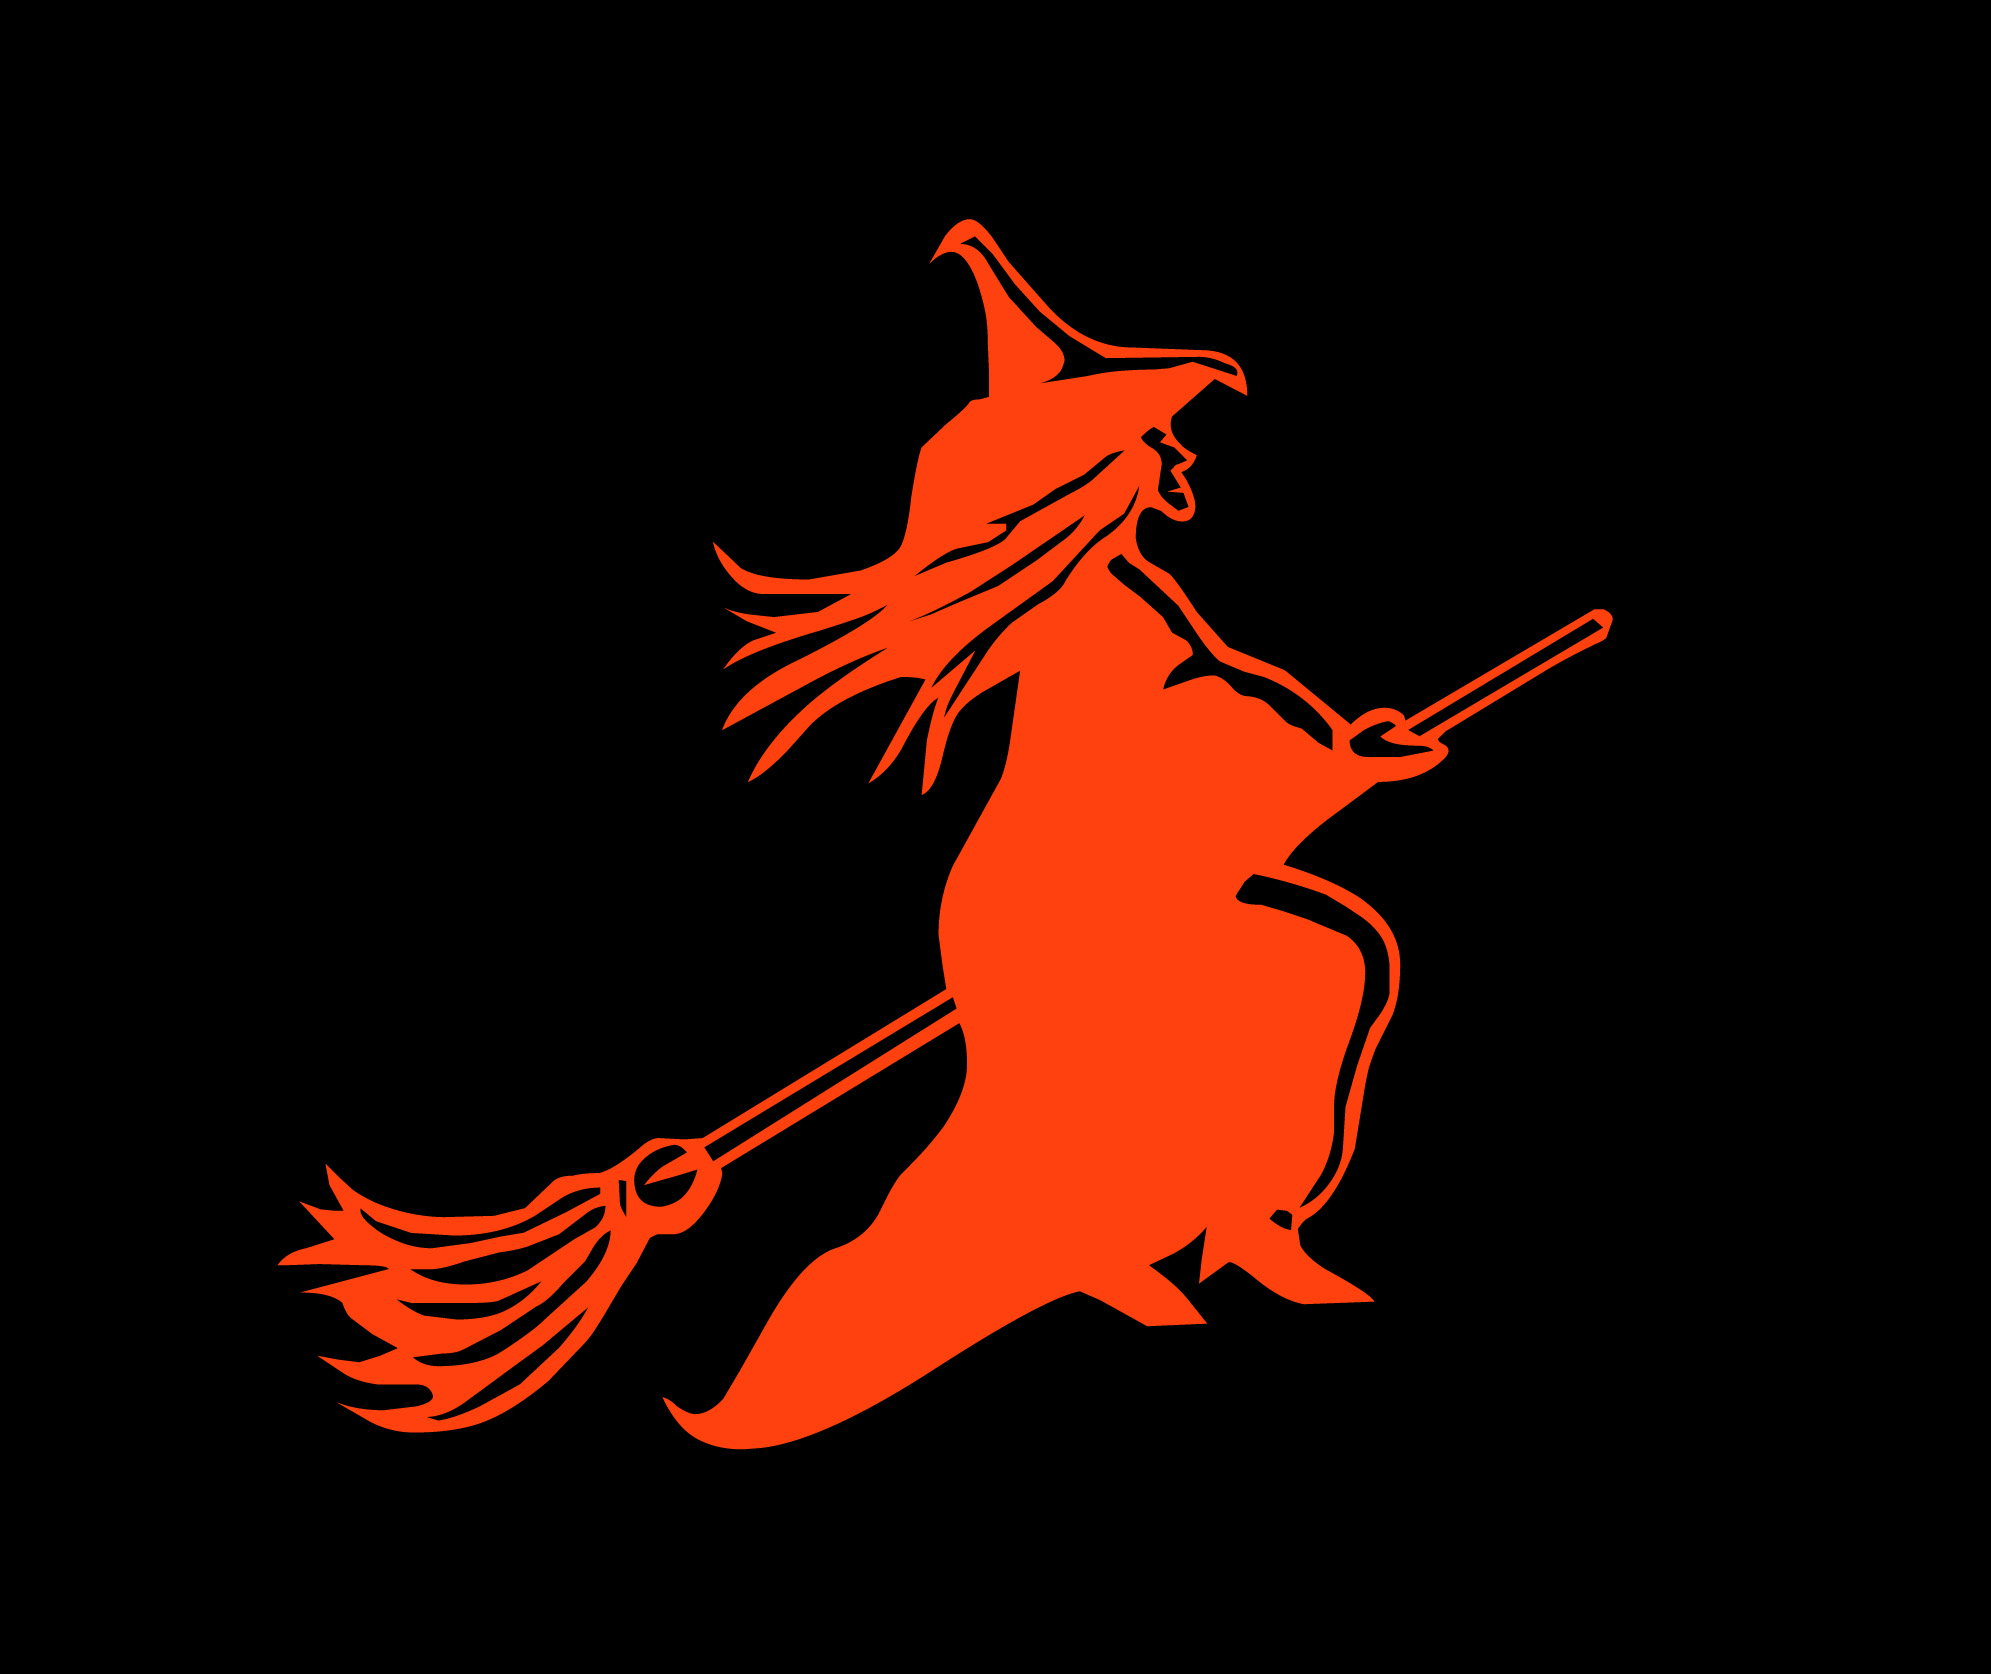 Halloween Witches On Broomsticks | Halloween Wallpapers 2014